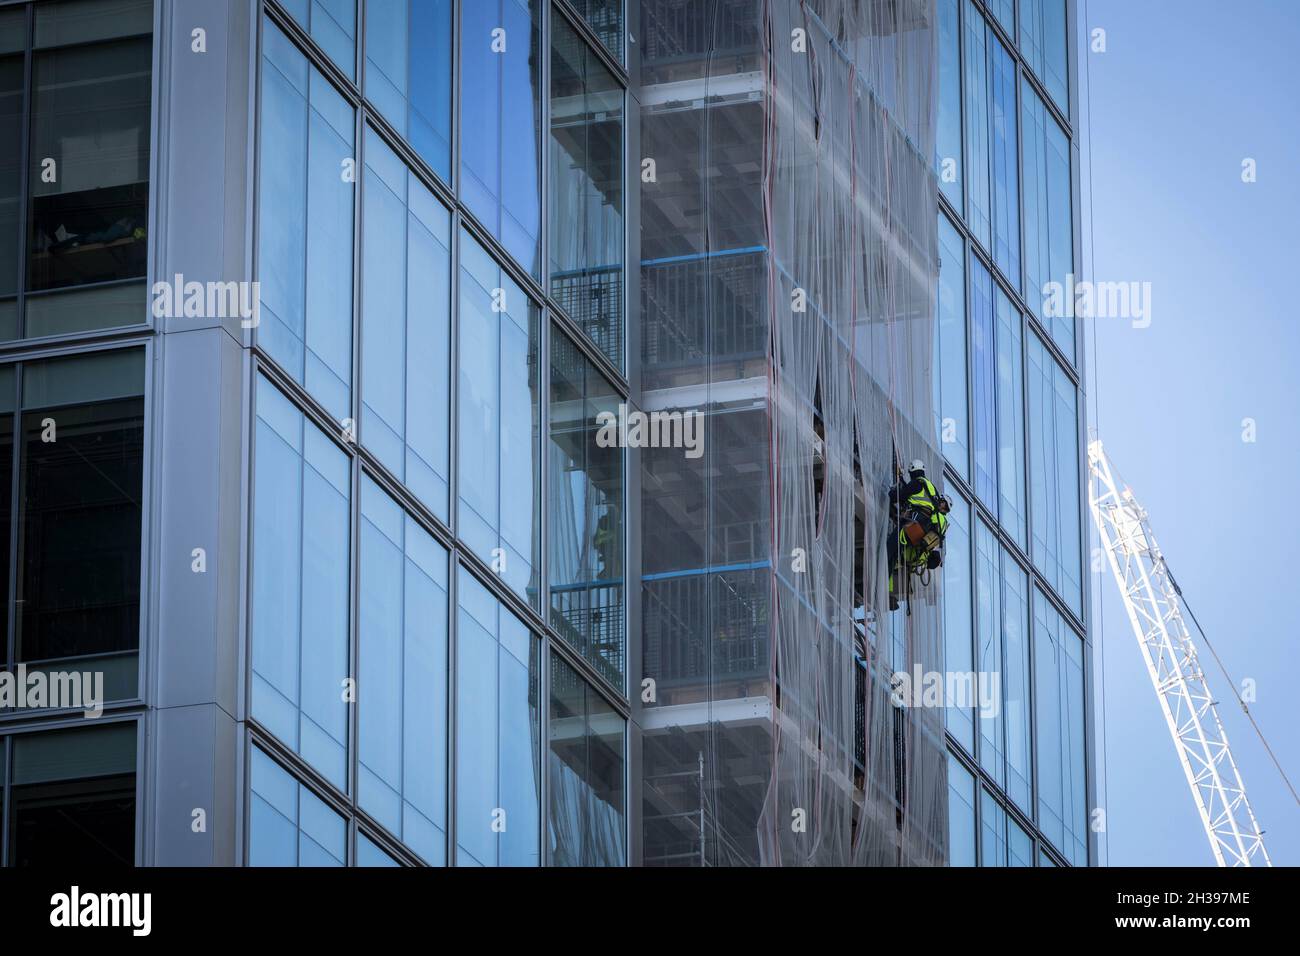 Workers on a high-rise building at Spitalfields, east London Stock Photo